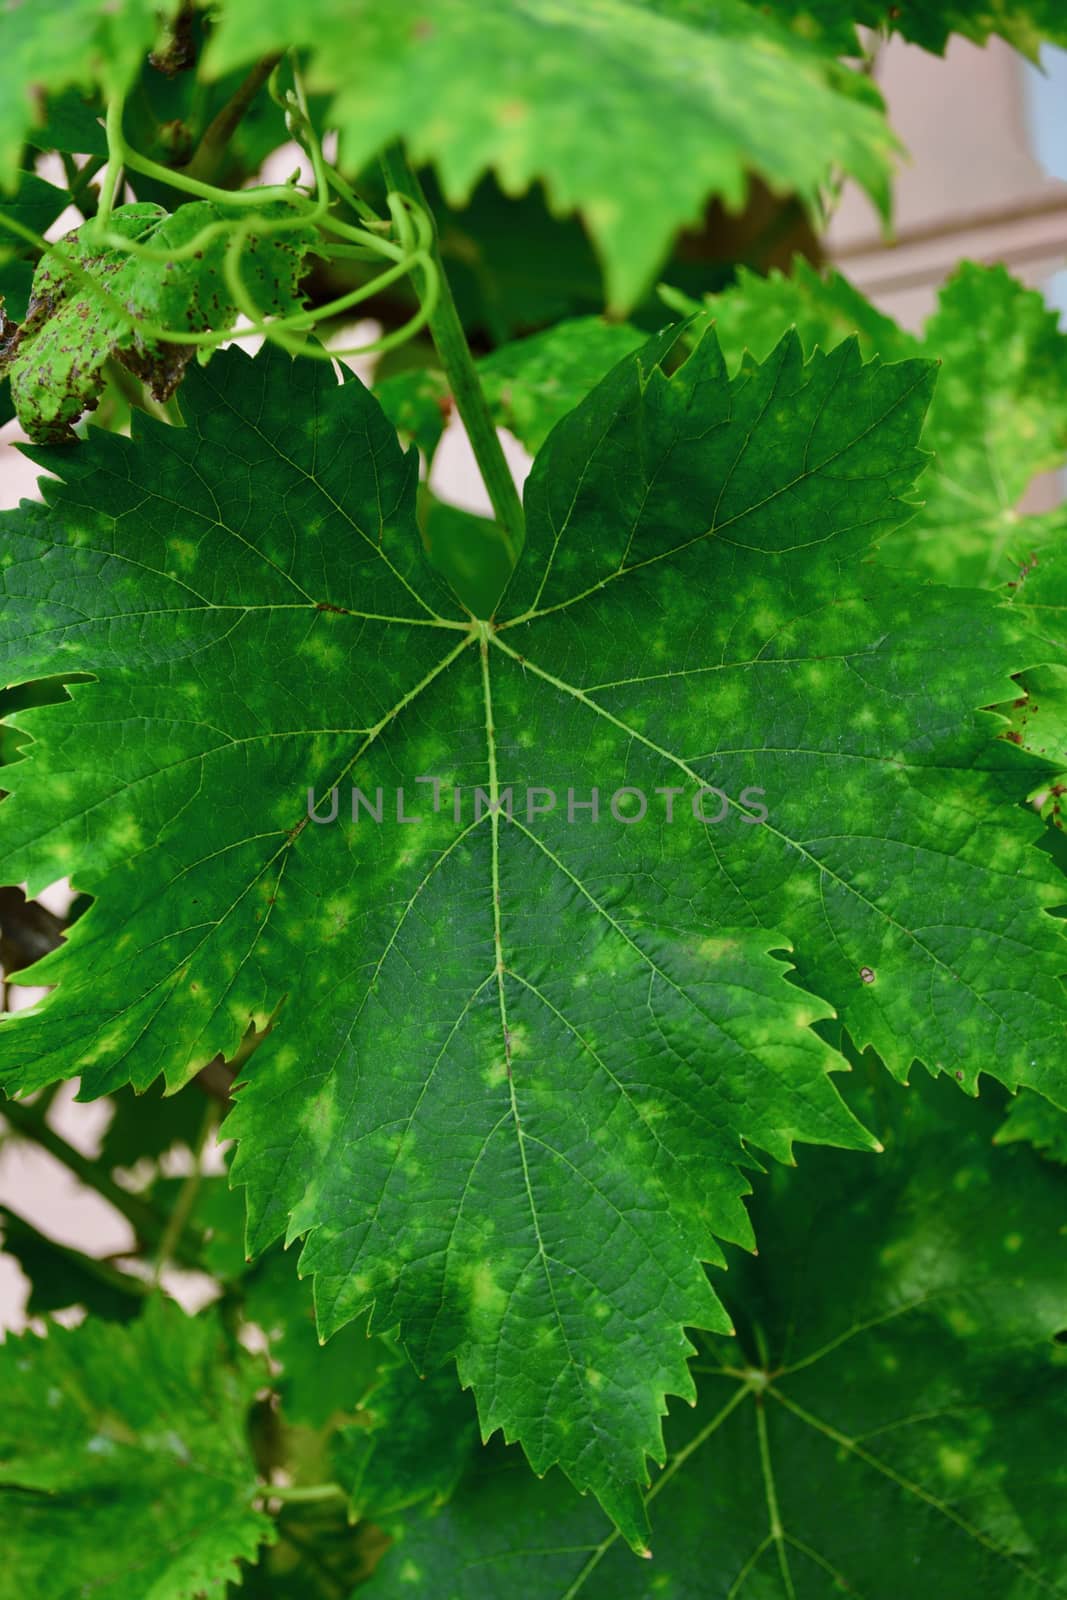 A close up of a grape leaf affected by Tobacco mosaic virus (TMV). The most notable symptom of this disease is the mosaic of dark and light green areas on foliage.  TMV is easily transmitted from plant to plant by mechanical means (e.g., worker's hands, cultivation, etc.) by Marshalkina